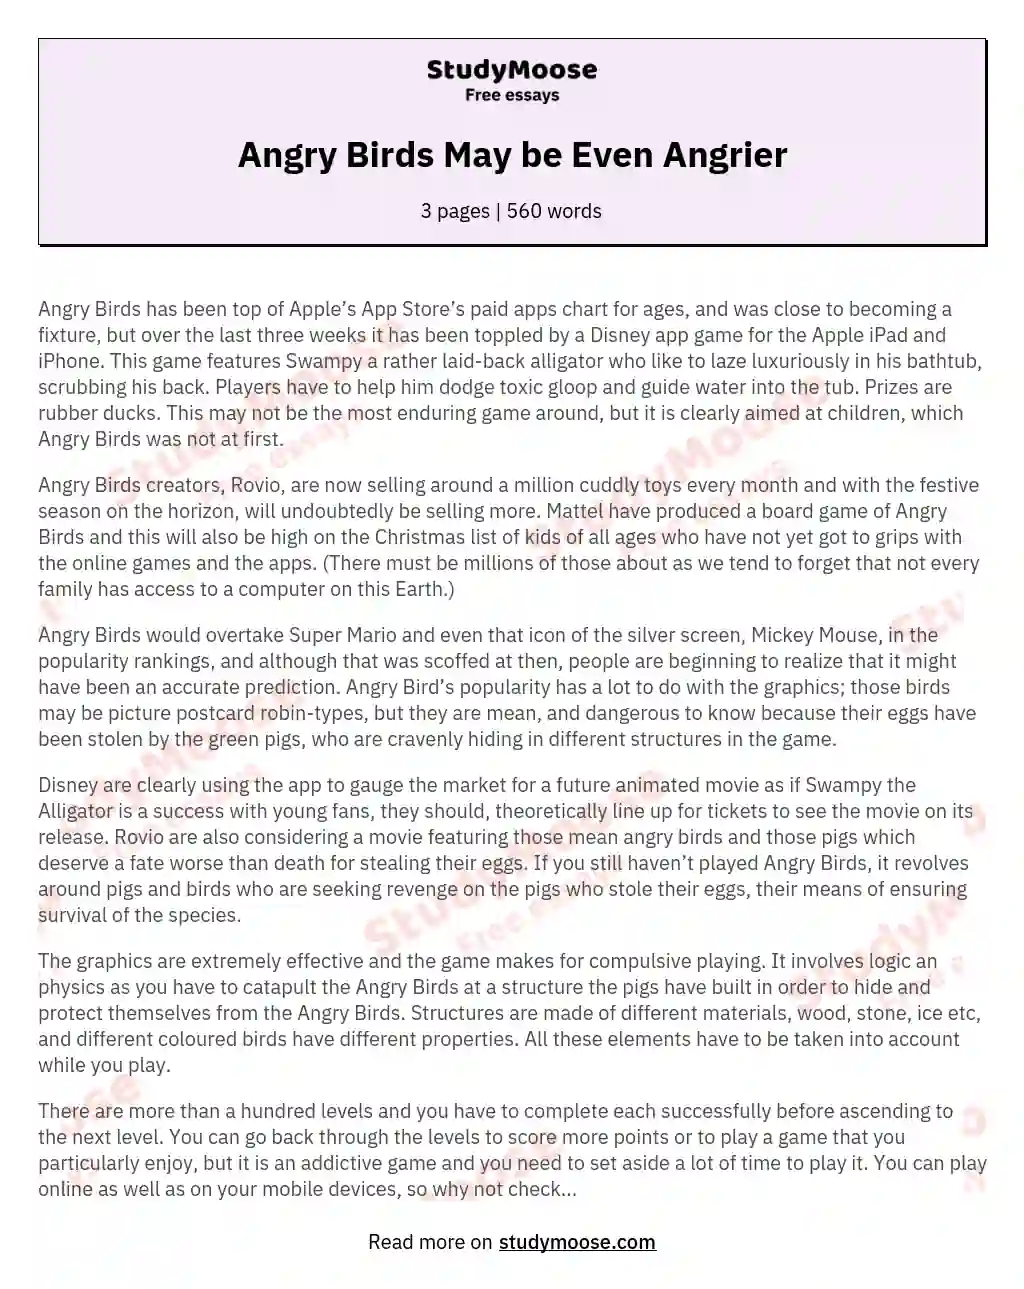 Angry Birds May be Even Angrier essay